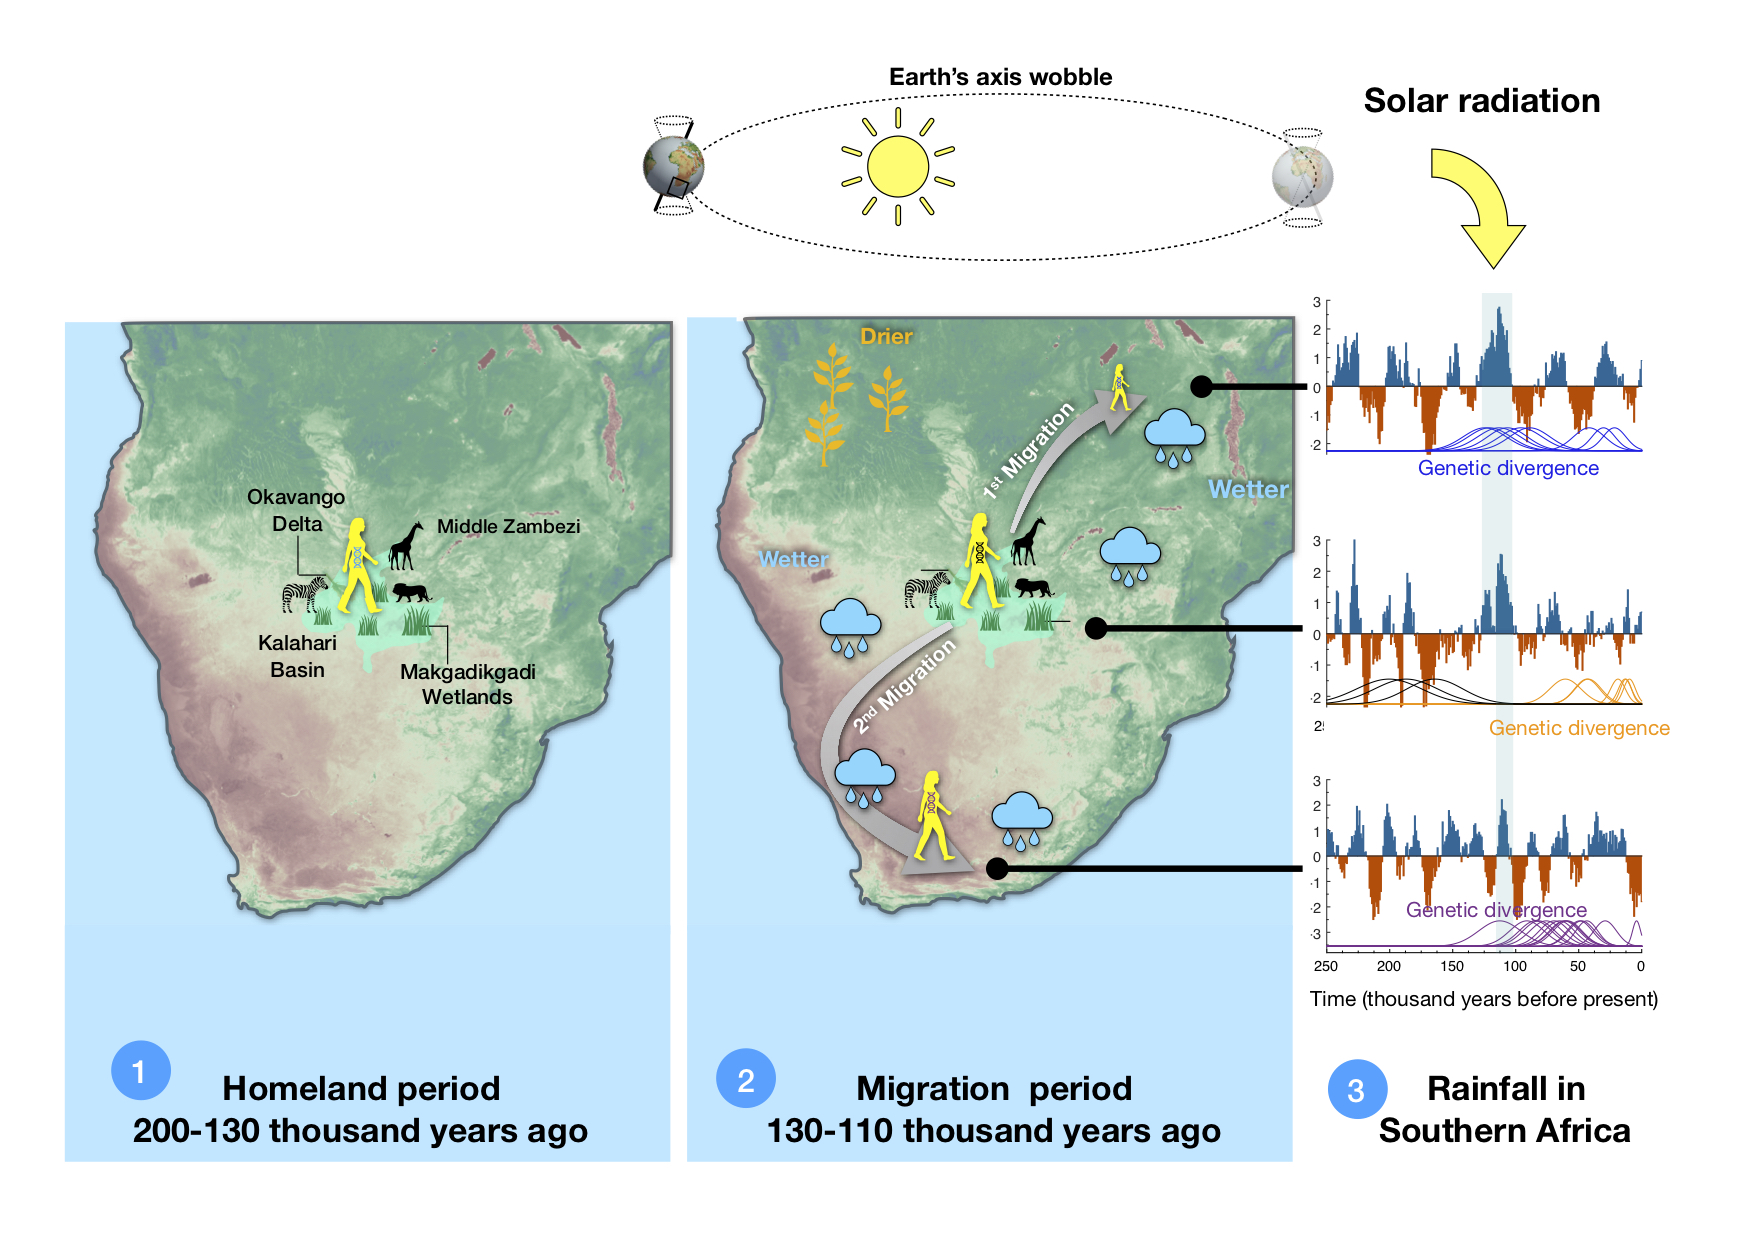 Figure 2: Anatomically modern humans lived in a vast wetland in the Kalahari region from 200-130 thousand years ago. There is no evidence for migration events out of this original homeland during this time. Around 130 thousand years ago, with earth’s orbit and solar radiation changing (upper panel), increased precipitation and vegetation northeast of the homeland (right panel) allowed to leave the homeland area (middle panel). About 15 thousand years later a green corridor opened to the southwest which allowed to migrate towards the west coast of Southern Africa, where they lived as coastal foragers. One group stayed in the homeland, where their descendants (Kalahari Khoesan) still live today. 